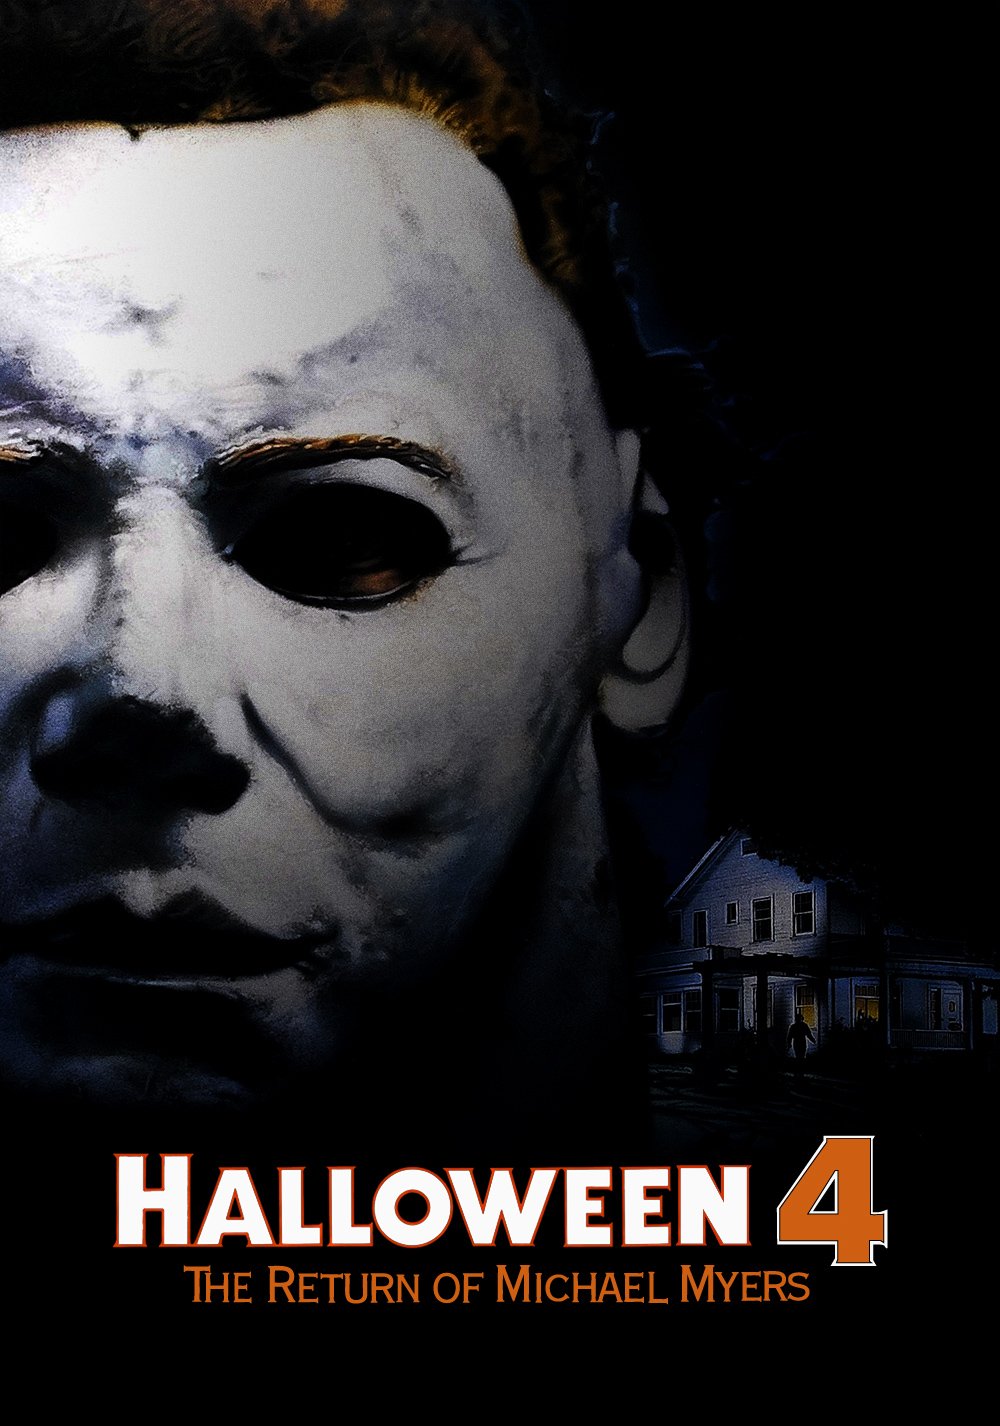 Halloween 4 The Return of Michael Myers Movie Poster ID 96035